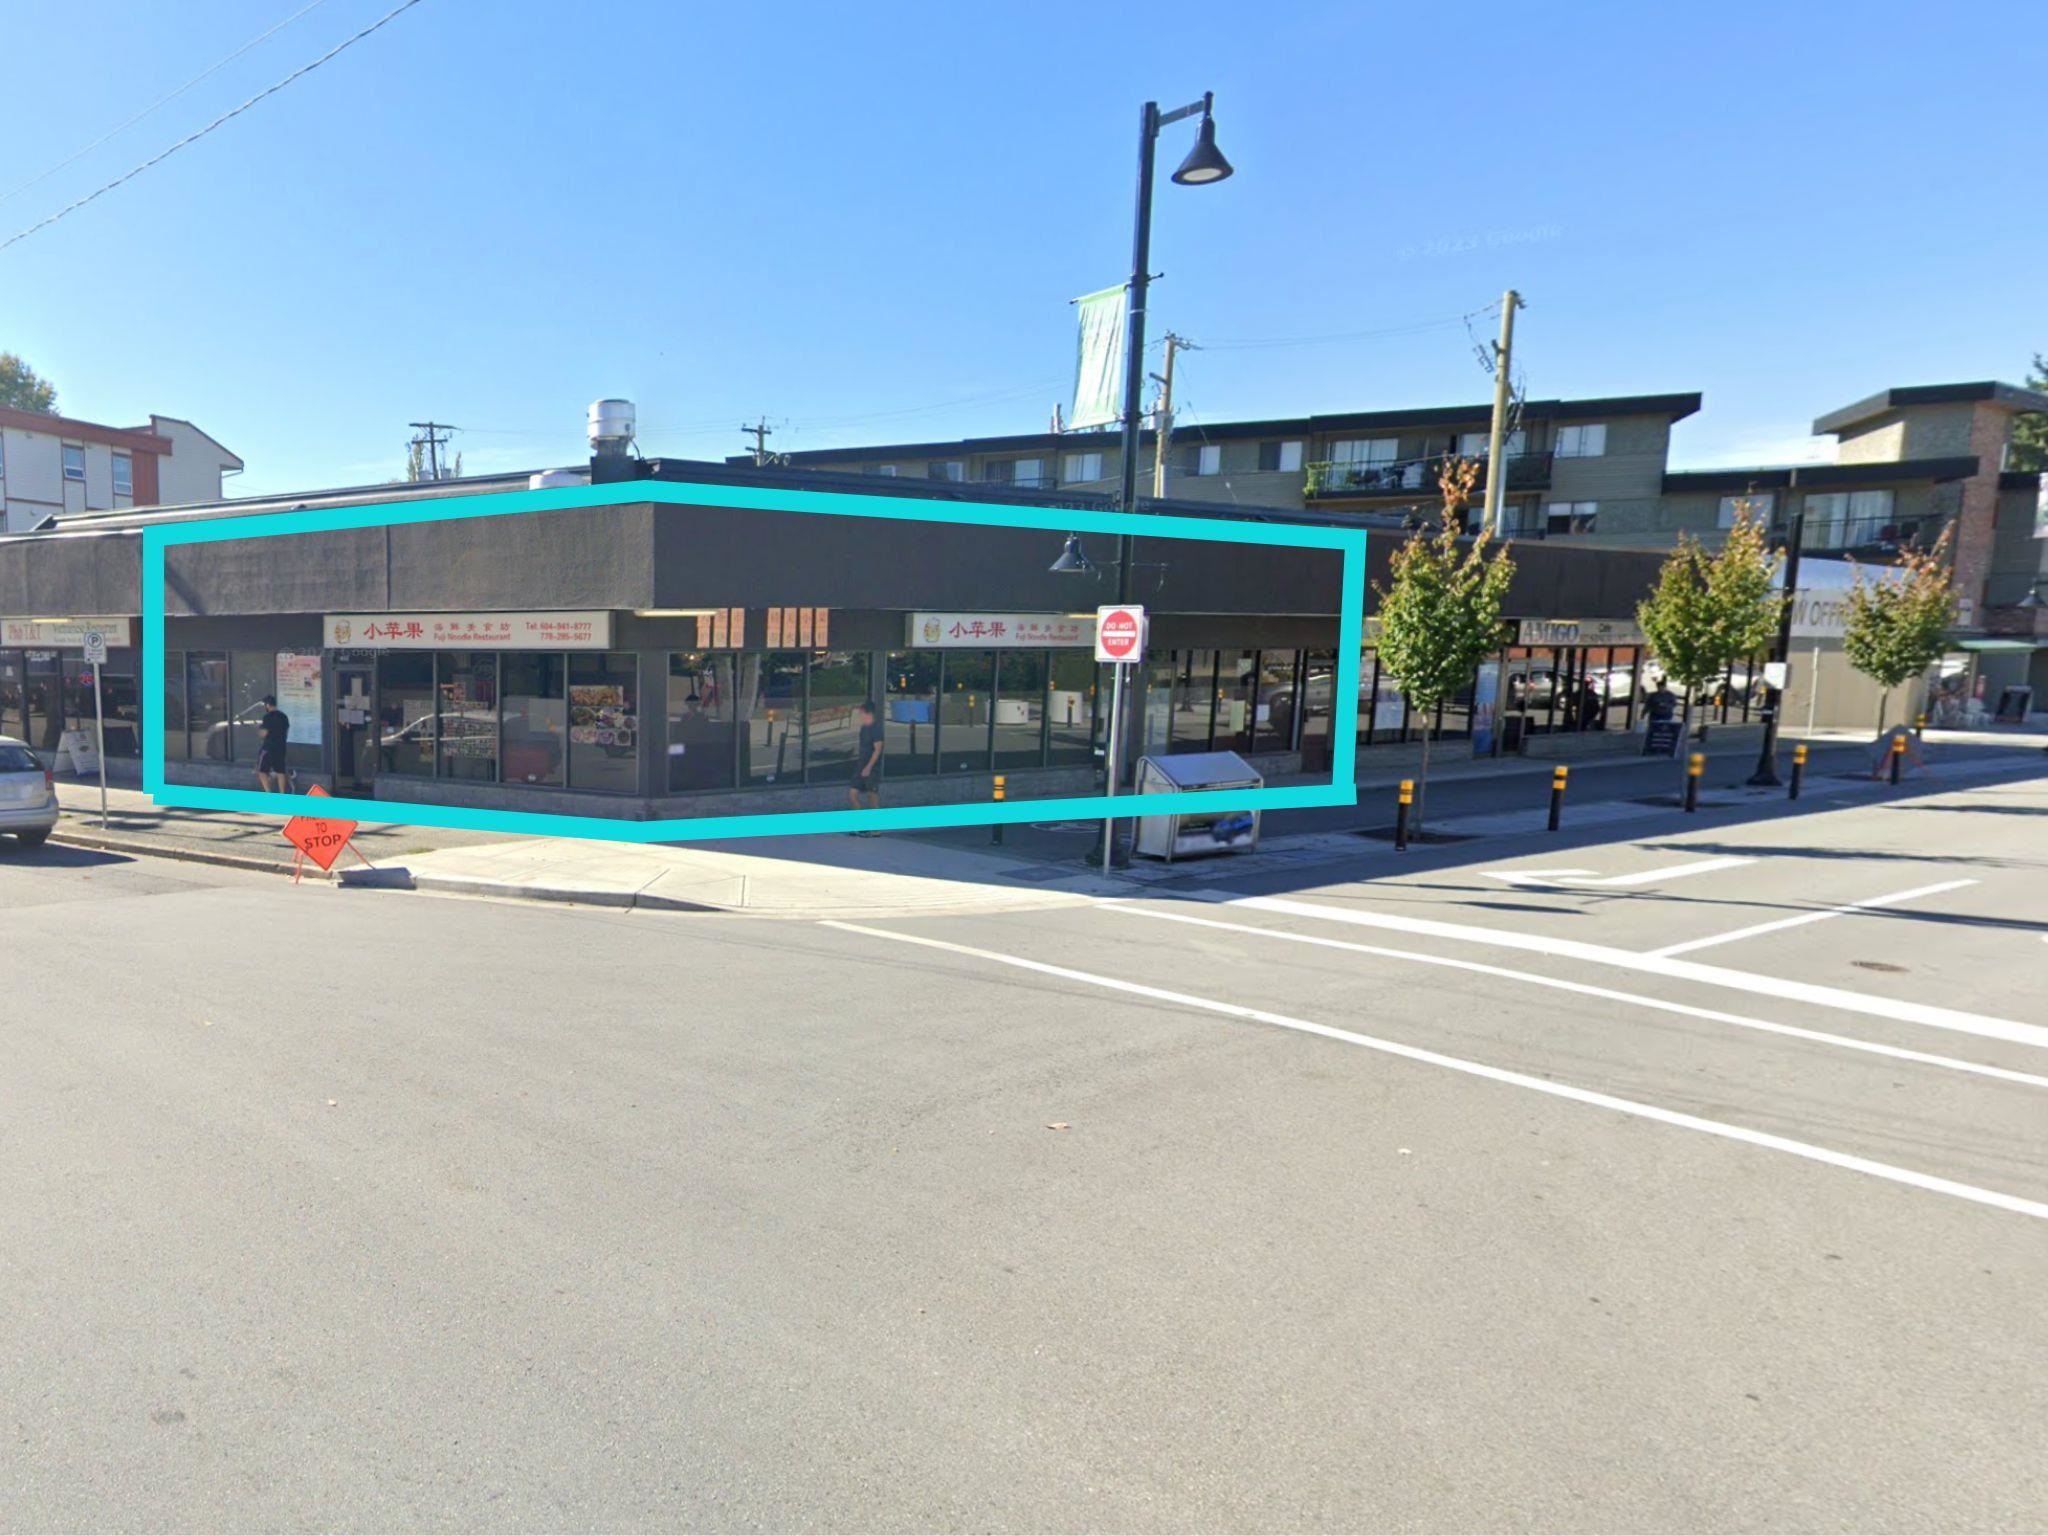 Central Pt Coquitlam Land Commercial for sale:    (Listed 6800-05-19)